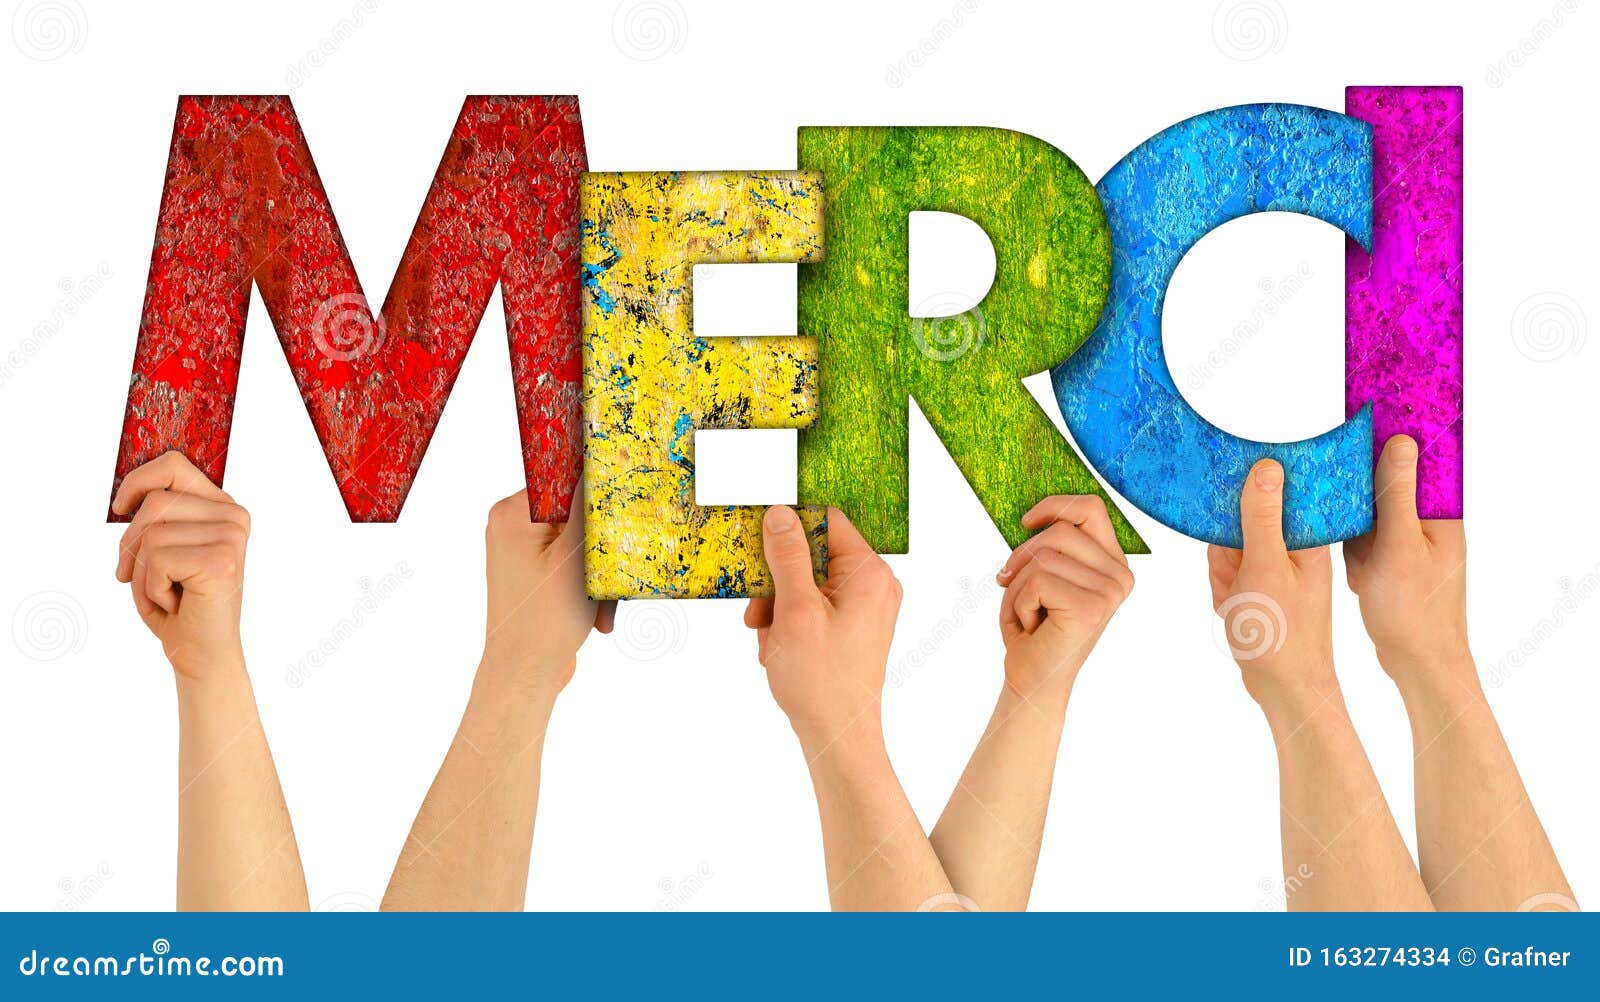 people holding up colorful rainbow wooden letter with the french word merci english traslation: thank you  white